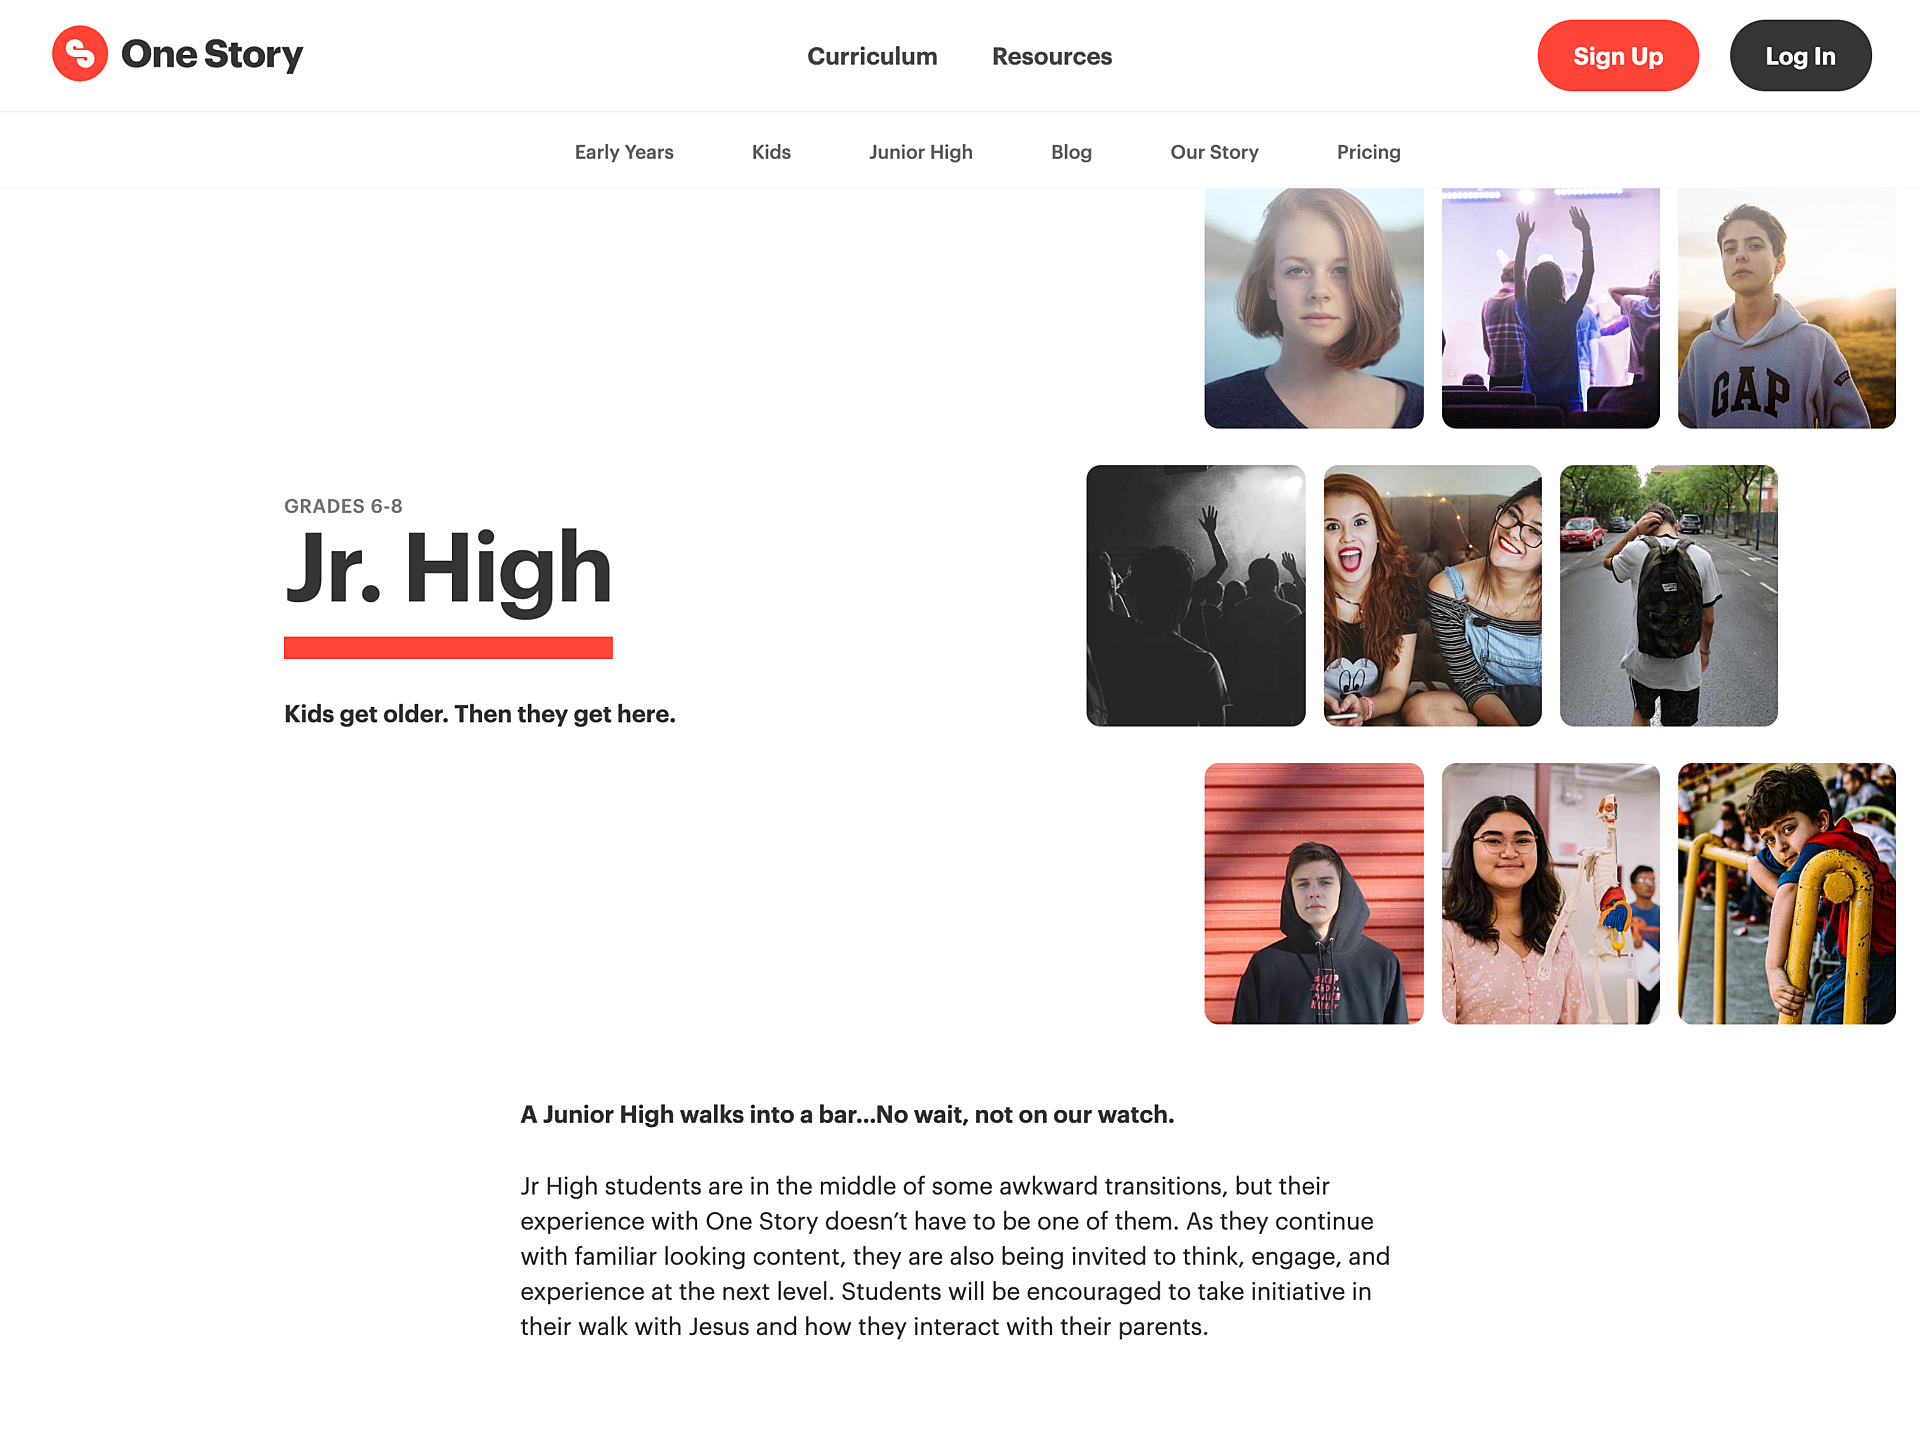 The page header of the Jr High curriculum page on the One Story website